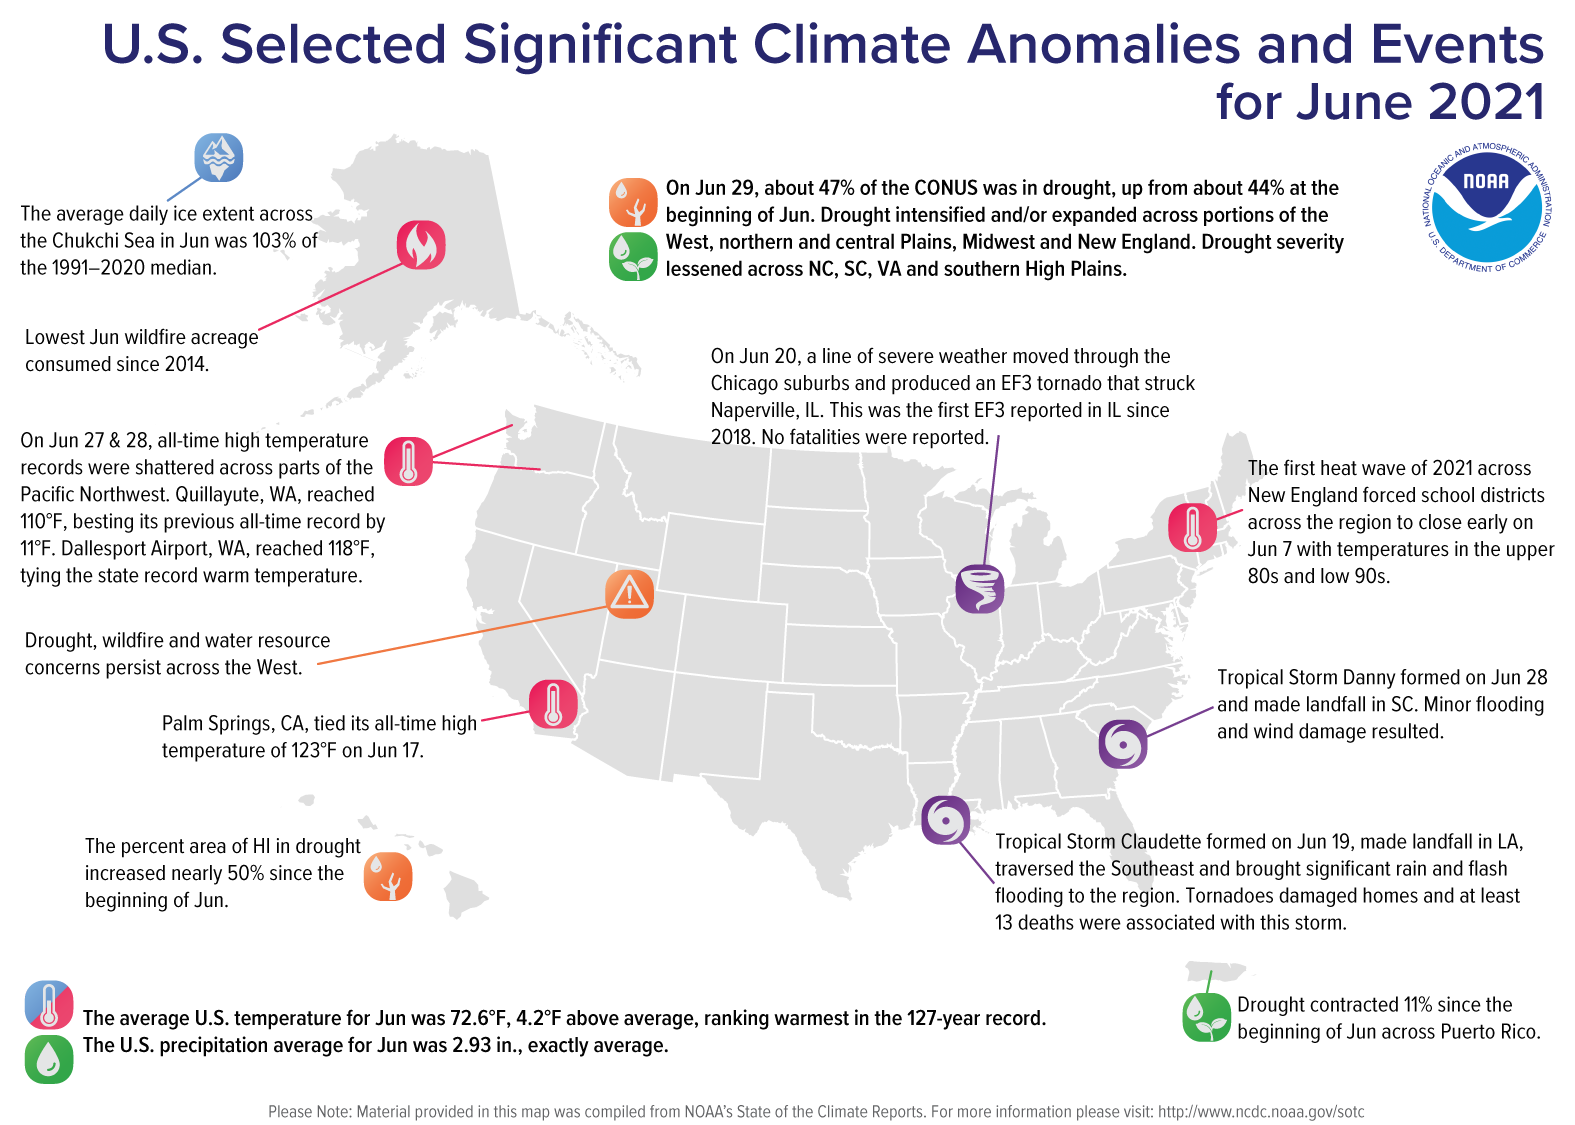 A map of the United States plotted with significant climate events that occurred during June 2021. Please see article text below as well as the full climate report highlights at http://bit.ly/USClimate202106. 